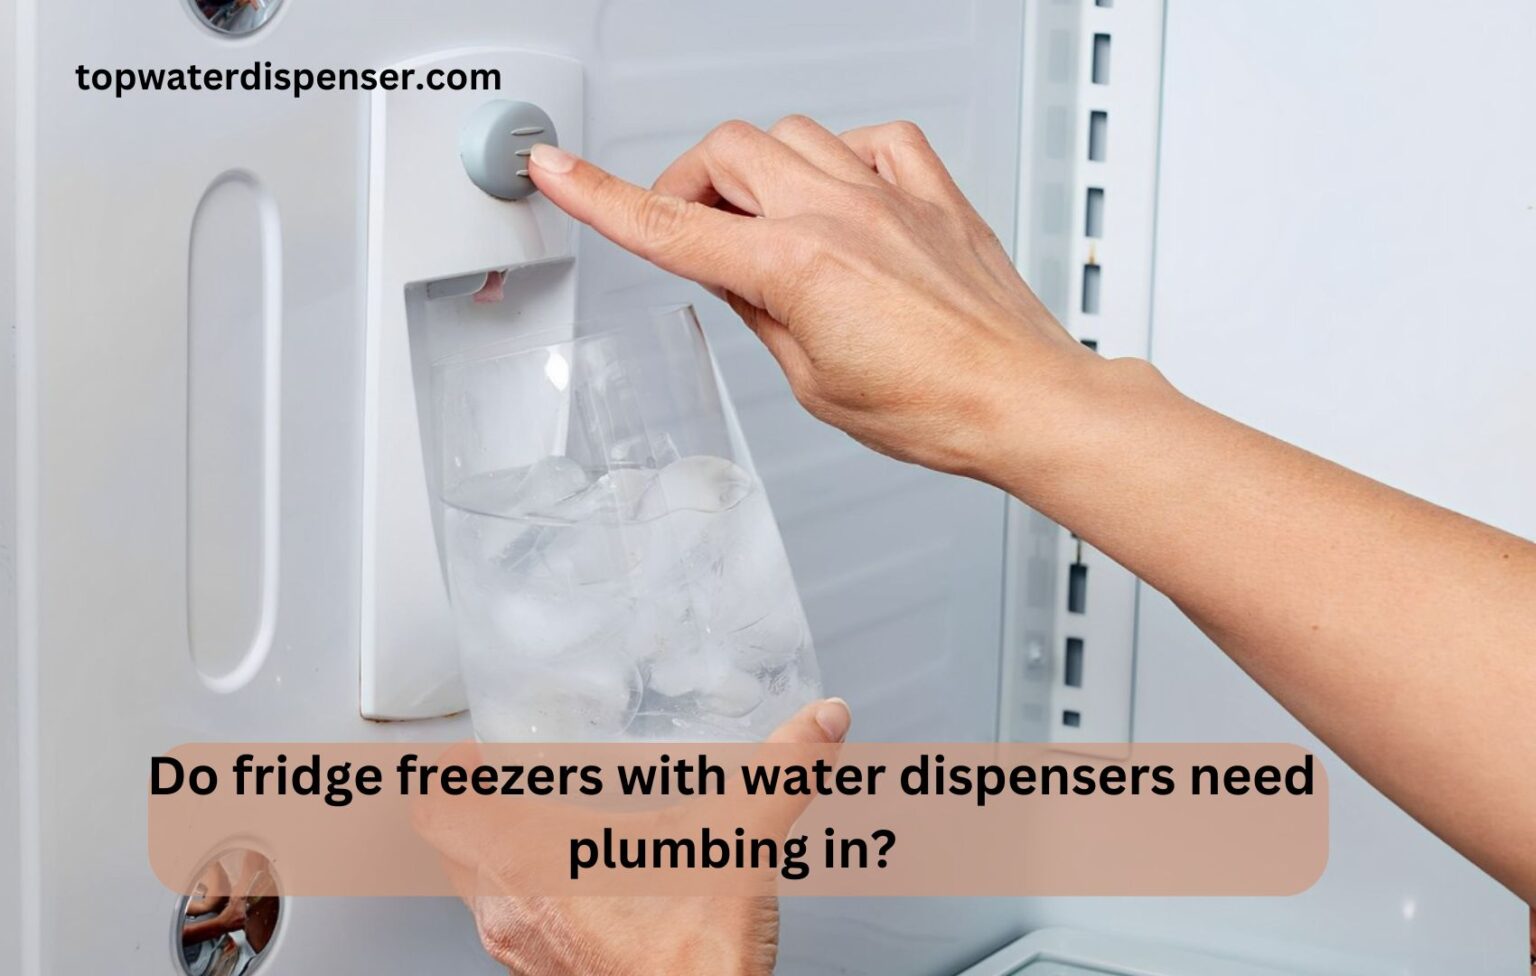 Do primo water dispensers need to be cleaned?